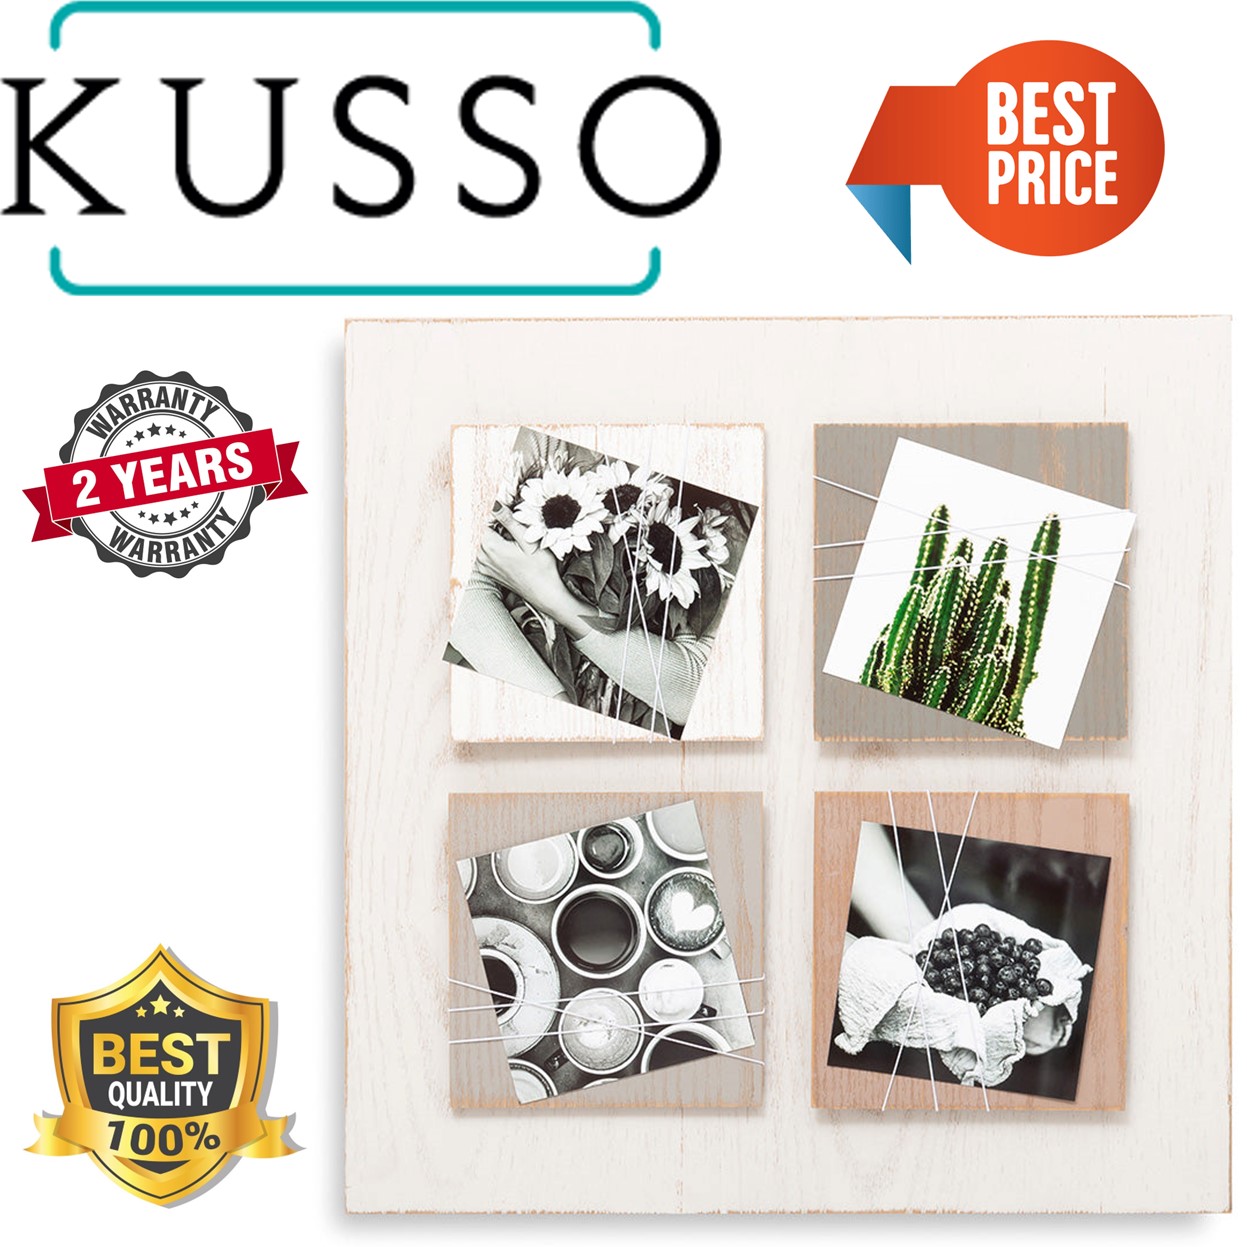 Kusso Rustic Design Photo Display for 9 Photos 4x4 Inches